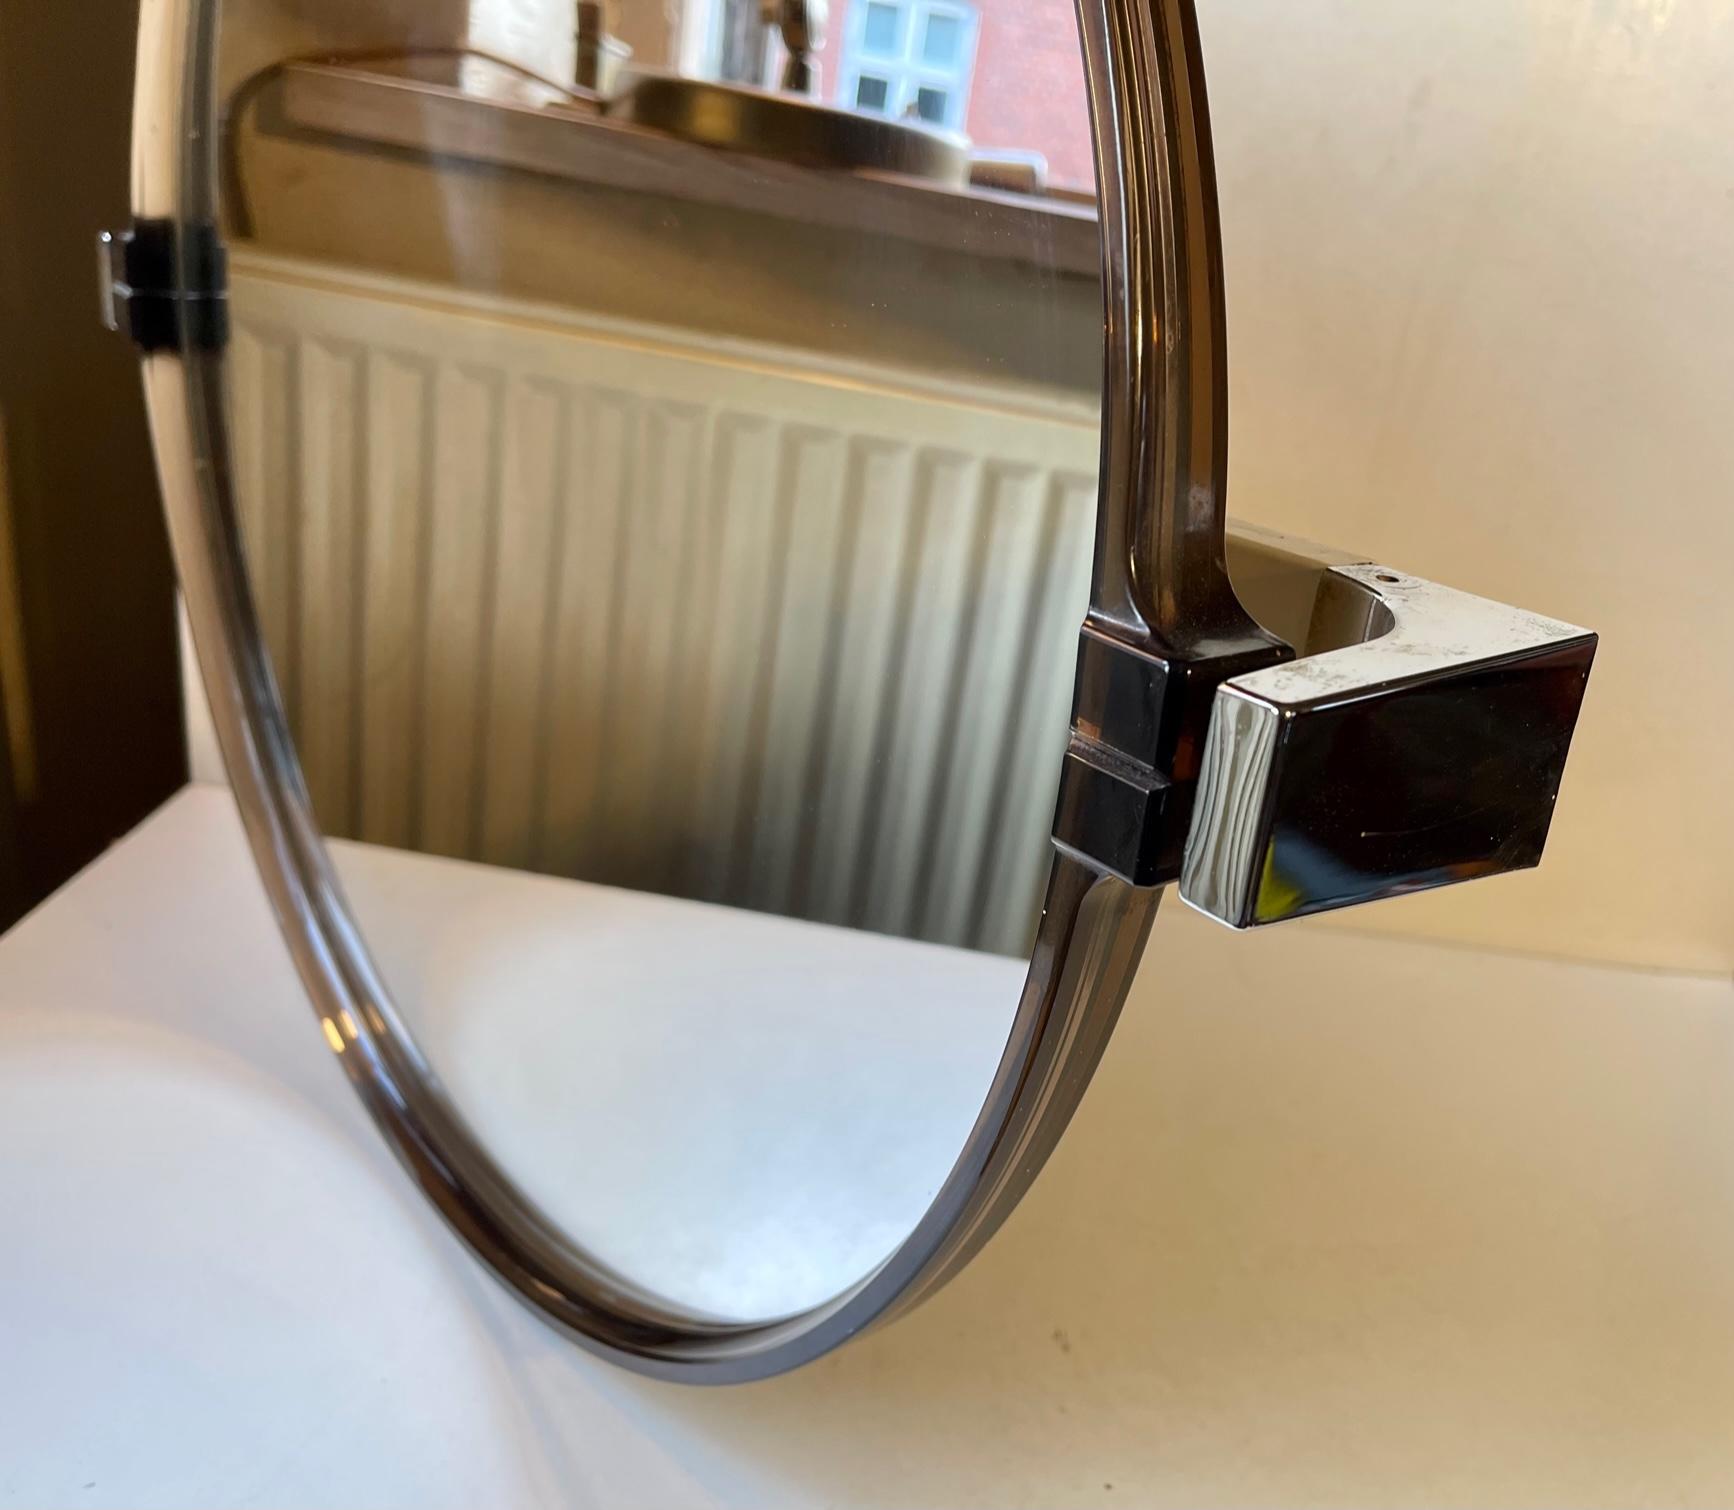 A tilting/adjustable wall mirror in smoked transparent acrylic. Suitable for bathrooms, vanity areas or as a make-up mirror in your bedroom. It was designed and manufactured by Allibert Germany circa 1970-80. Measurements: D: 50 cm (mirror),